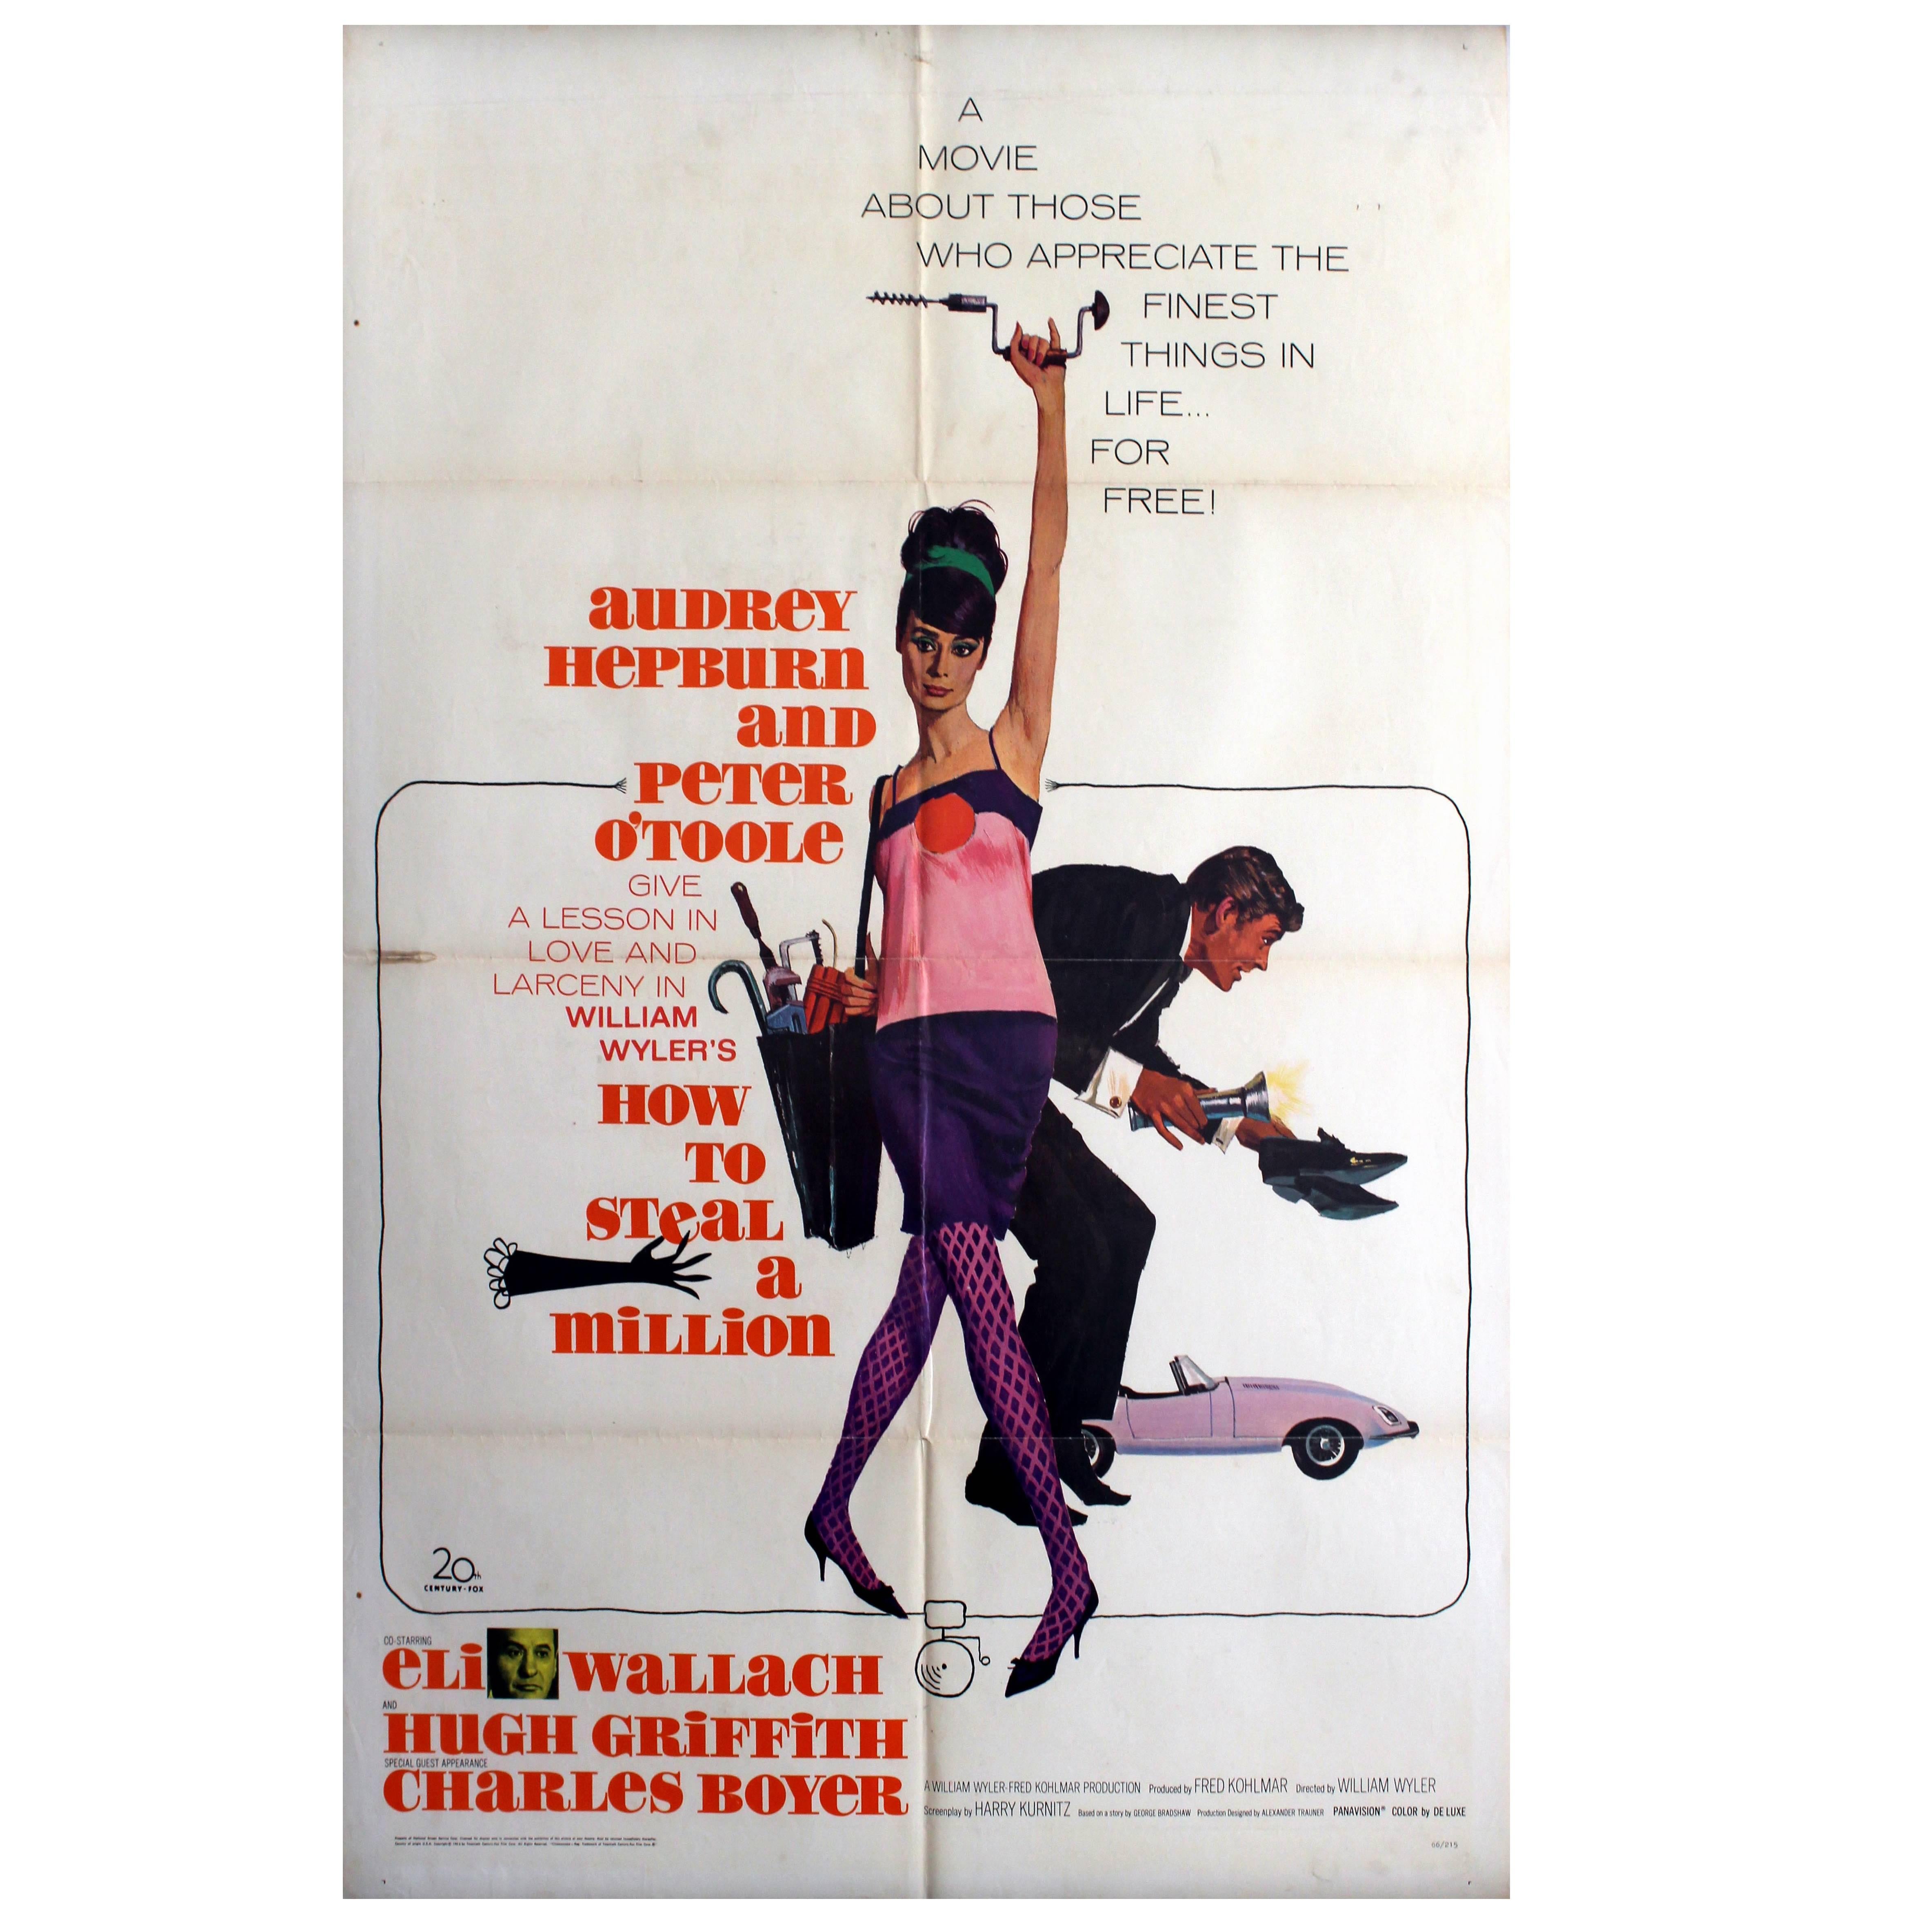 Original 1966 Movie Poster for “How to Steal a Million Starring Audrey Hepburn”